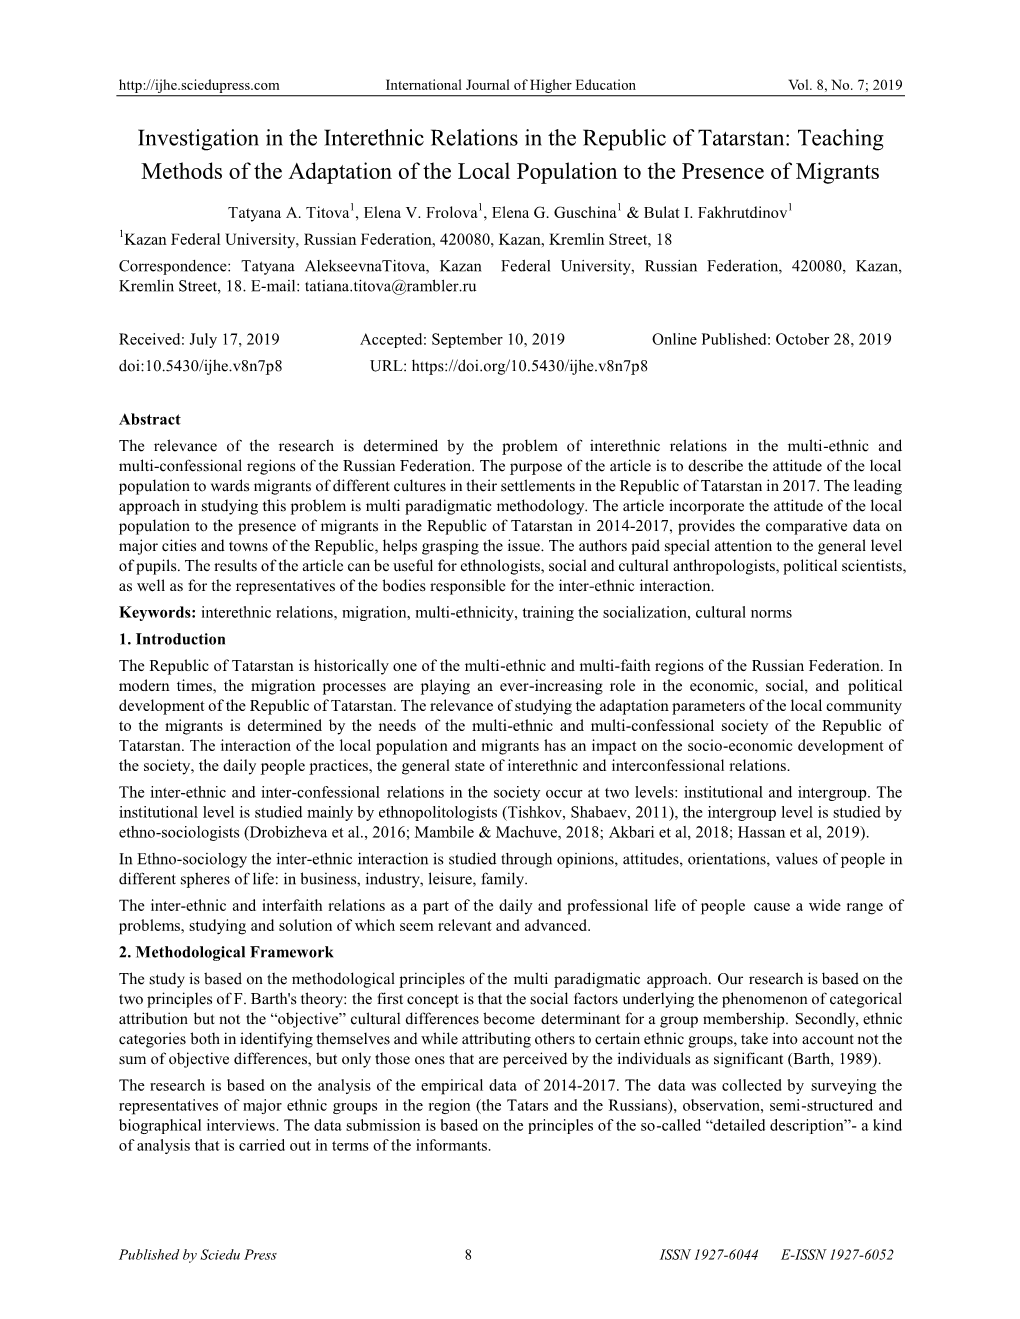 Investigation in the Interethnic Relations in the Republic of Tatarstan: Teaching Methods of the Adaptation of the Local Population to the Presence of Migrants